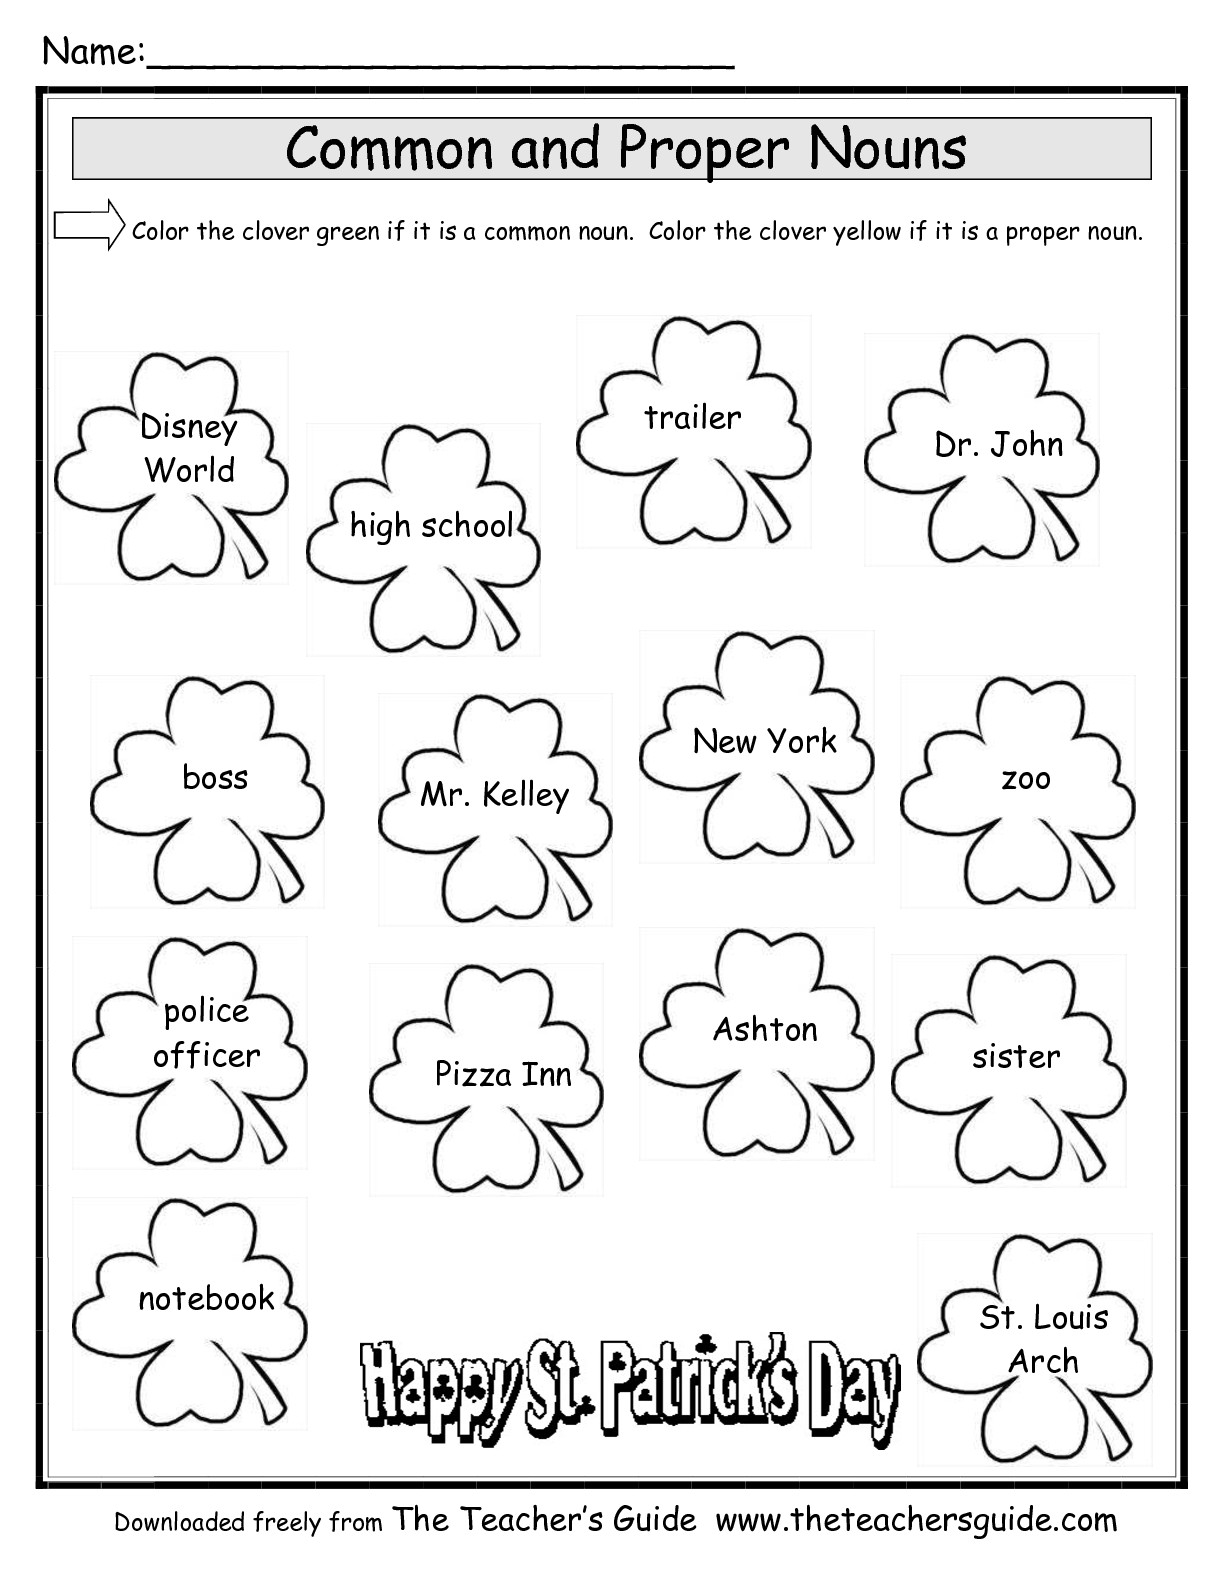 choose-common-and-proper-nouns-worksheet-turtle-diary